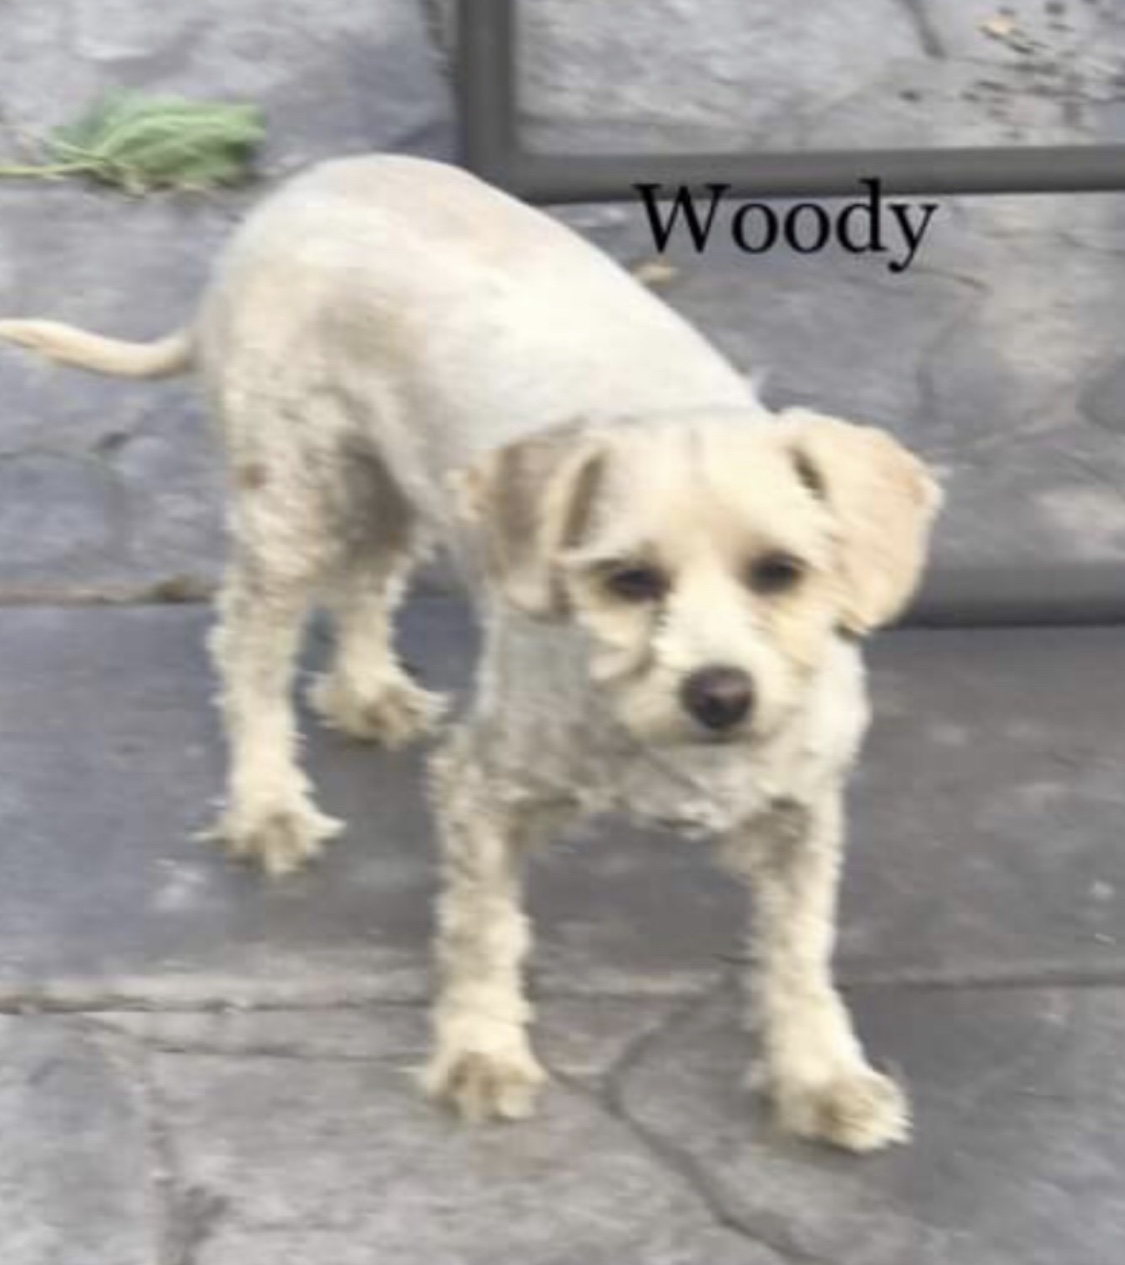 Image of Woody, Lost Dog